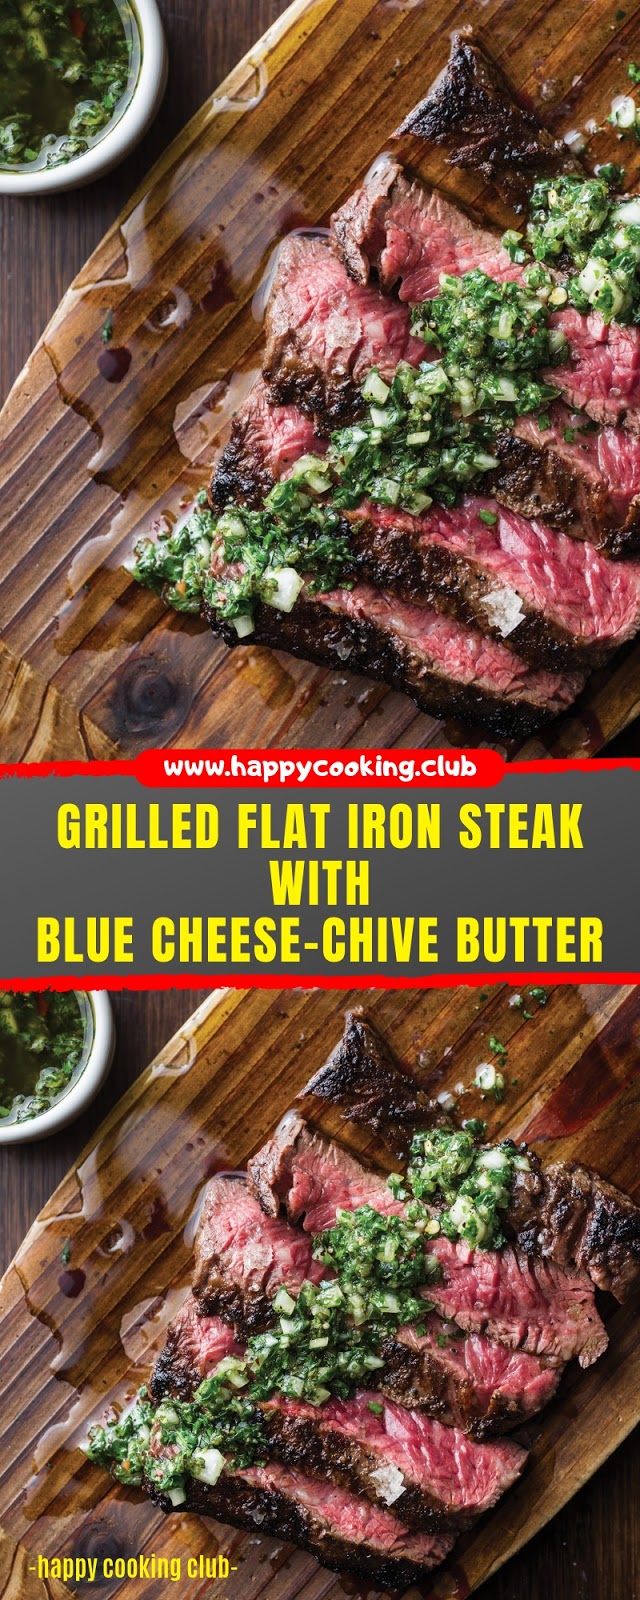 GRILLED FLAT IRON STEAK WITH BLUE CHEESE-CHIVE BUTTER